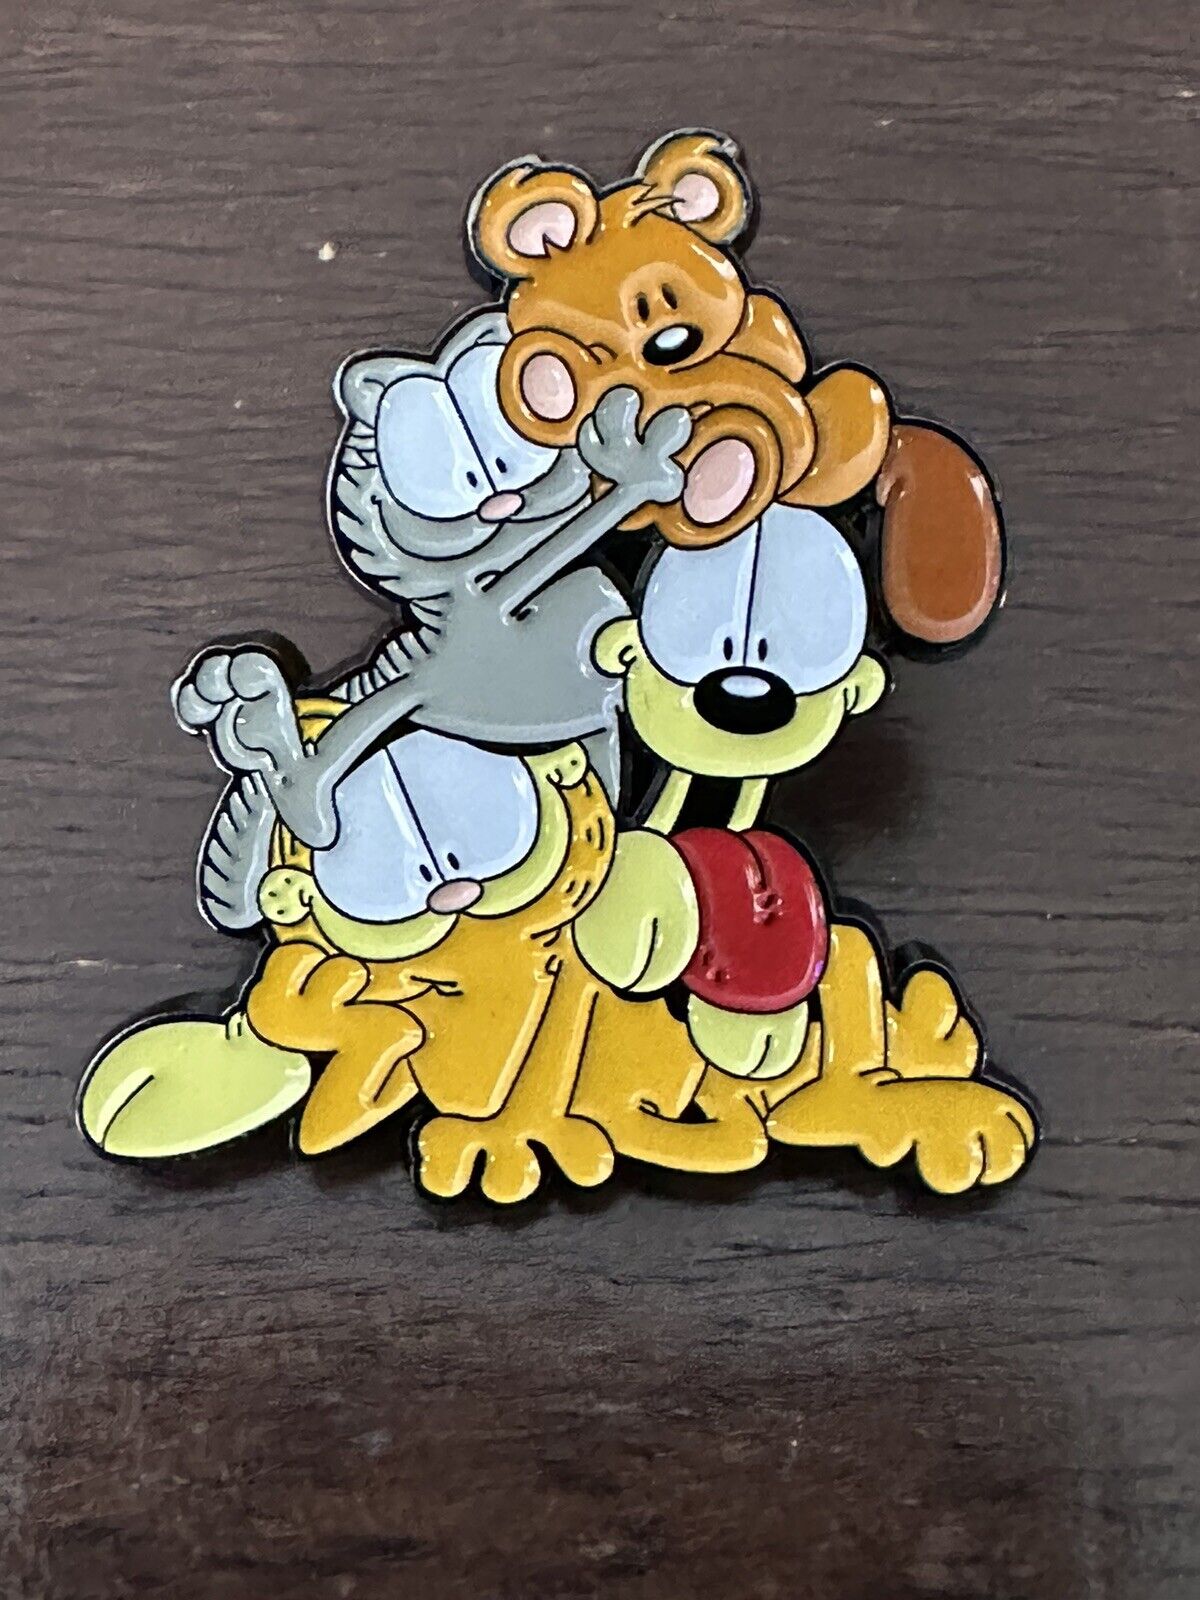 Garfield, Odie, Nermal And Pooky Pin